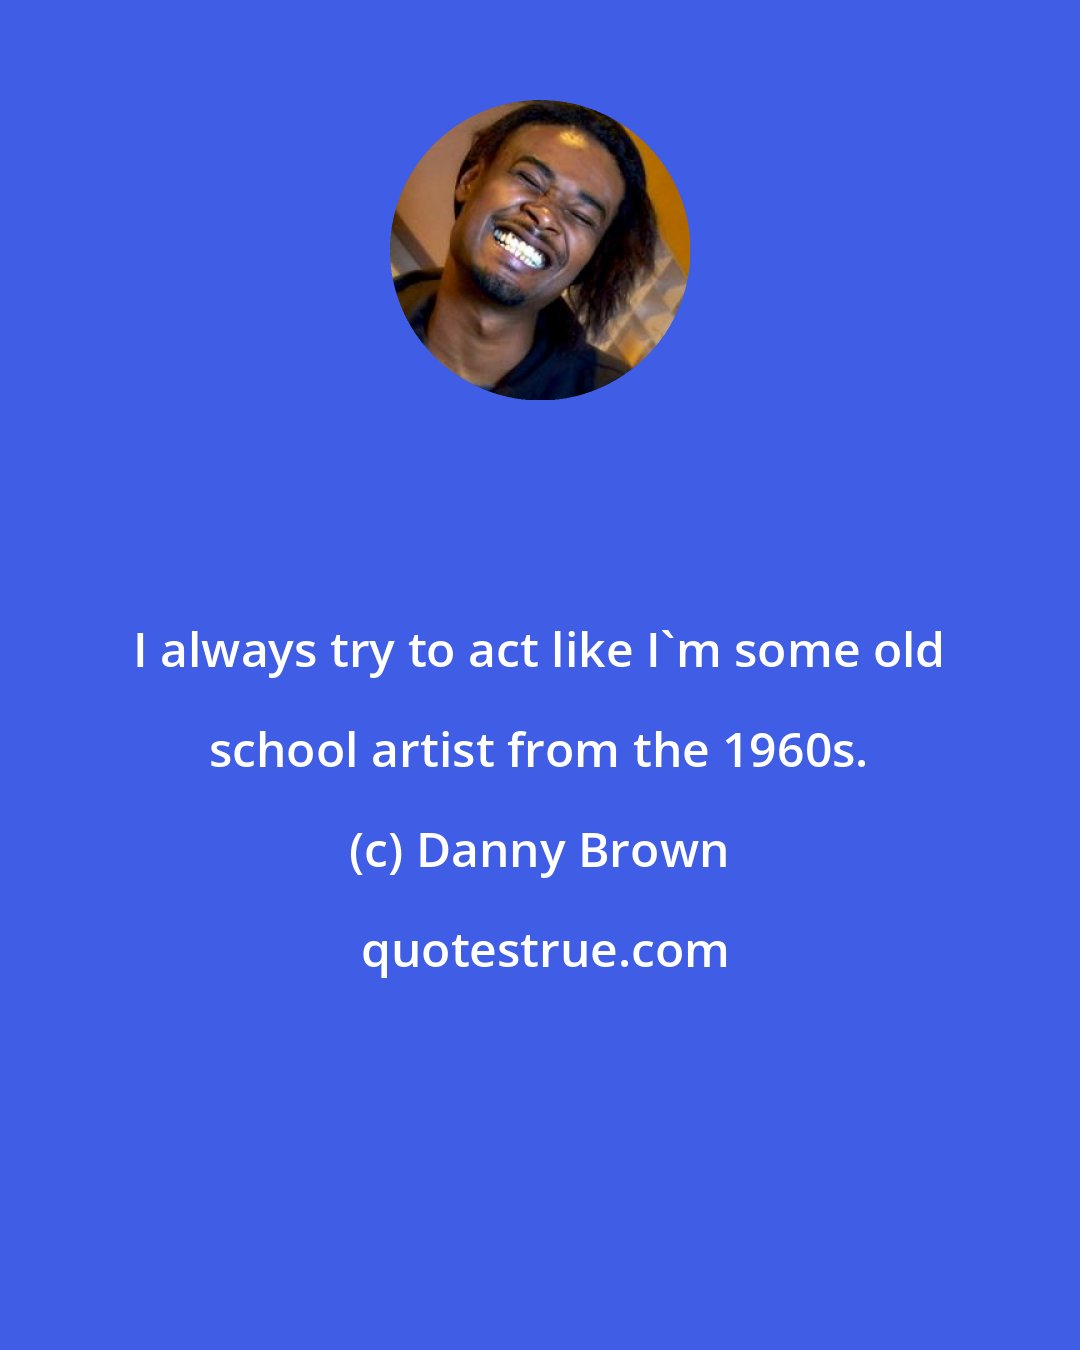 Danny Brown: I always try to act like I'm some old school artist from the 1960s.